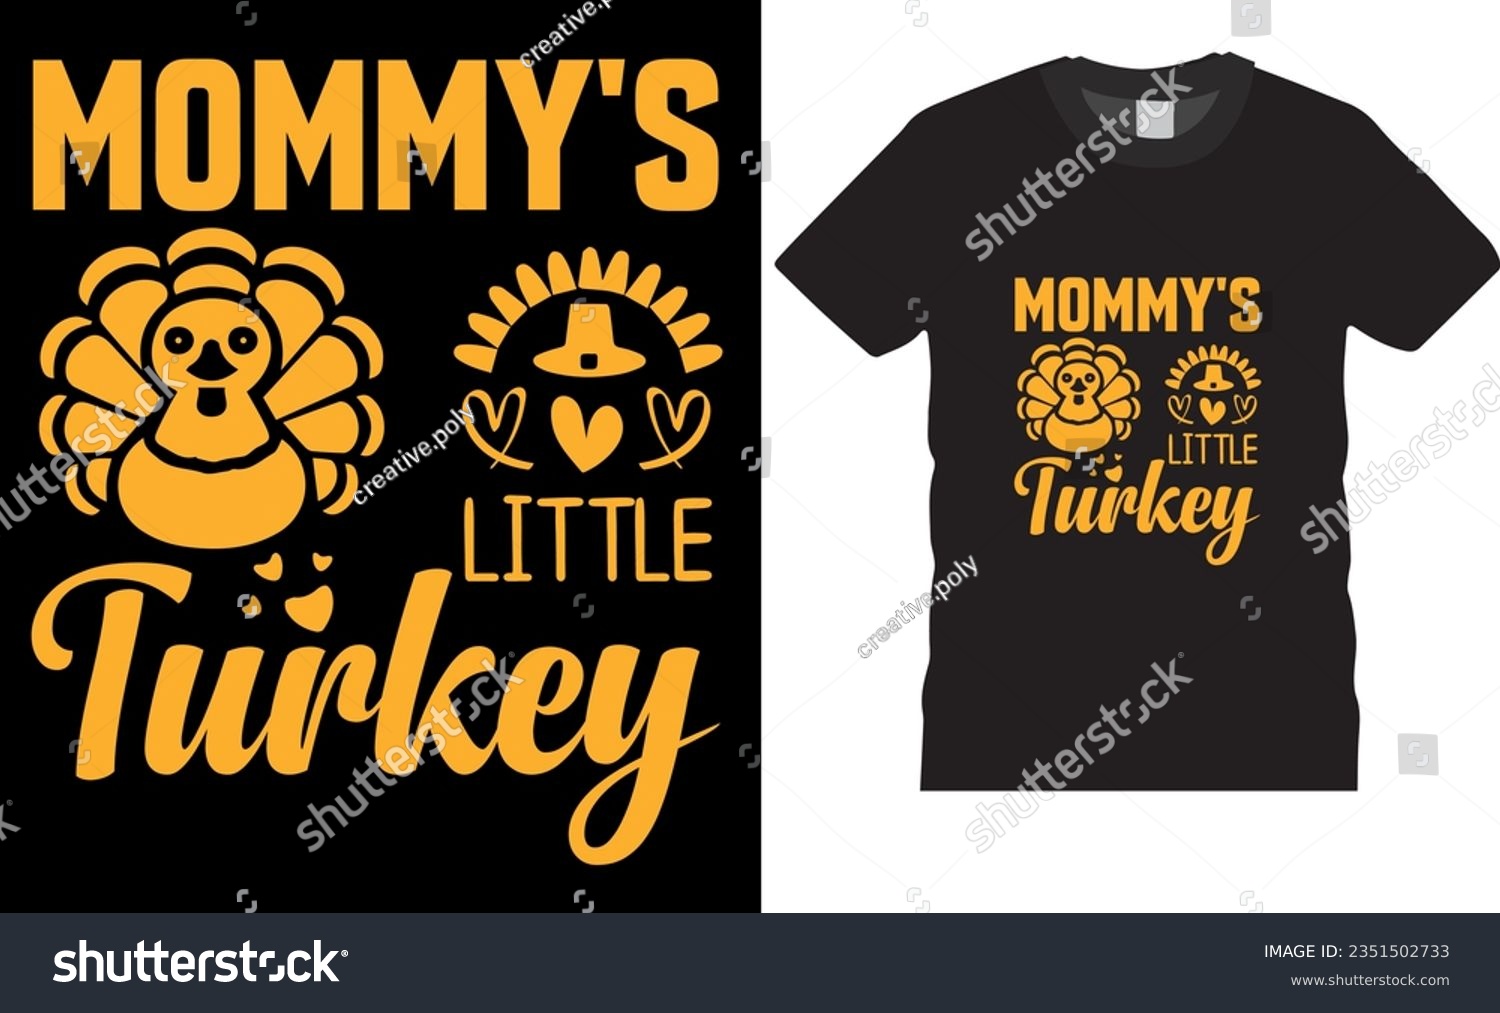 SVG of mommy's little turkey t shirt design vector template. Party lettering, calligraphy Typography  vector illustrations. Unique and Trendy Beautiful and eye catching vector graphic T-shirts Design. svg